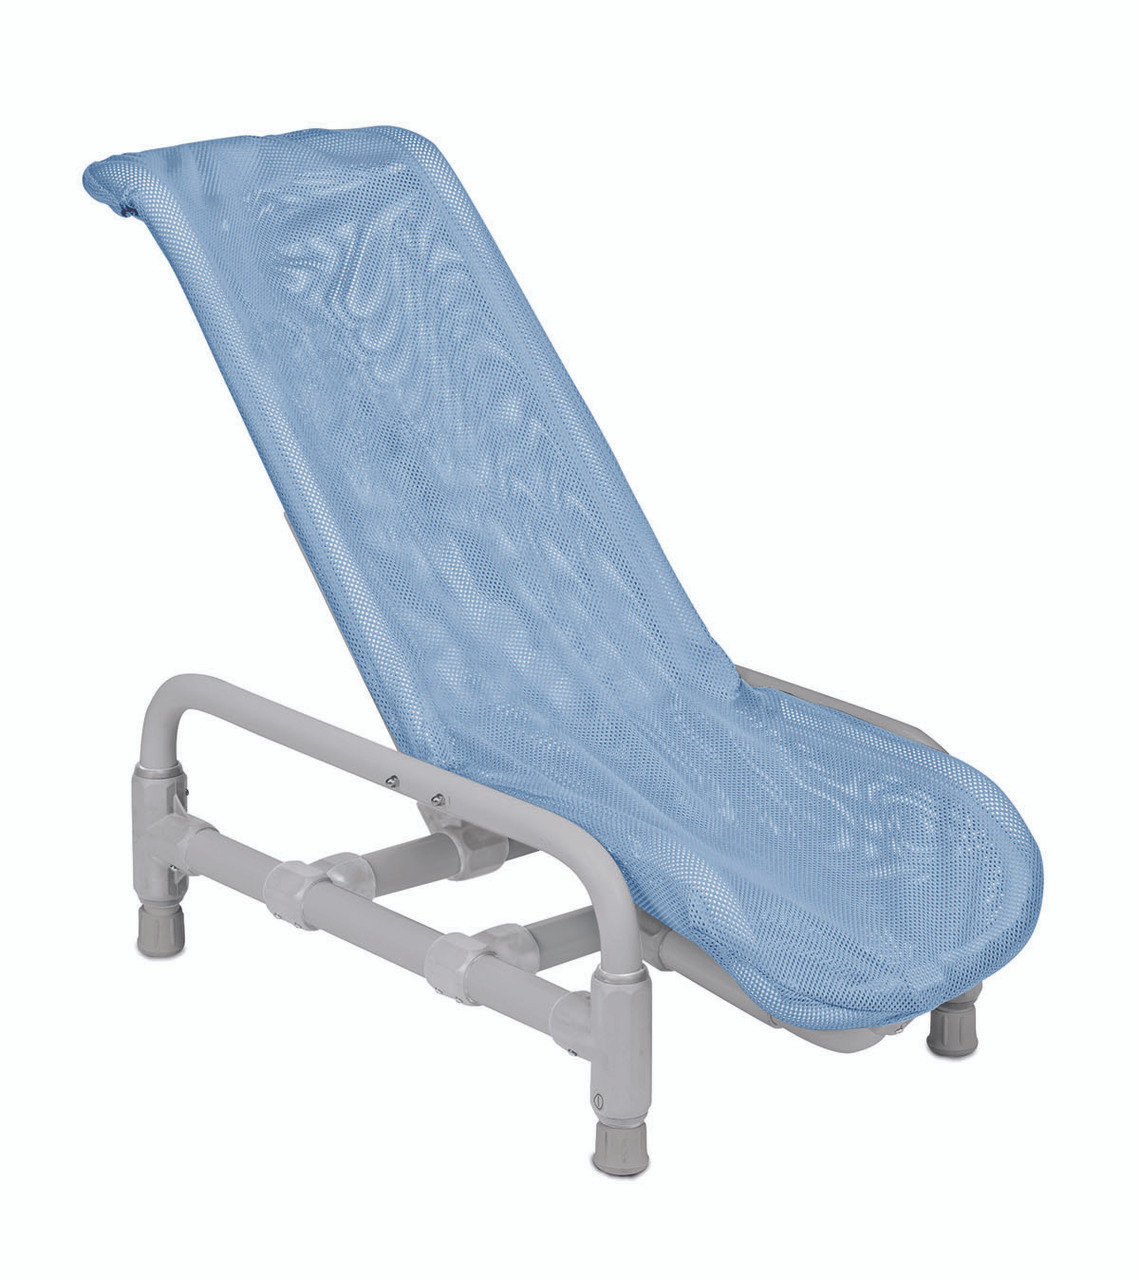 Articulating bath chair with safety harness, small to 100 lb.